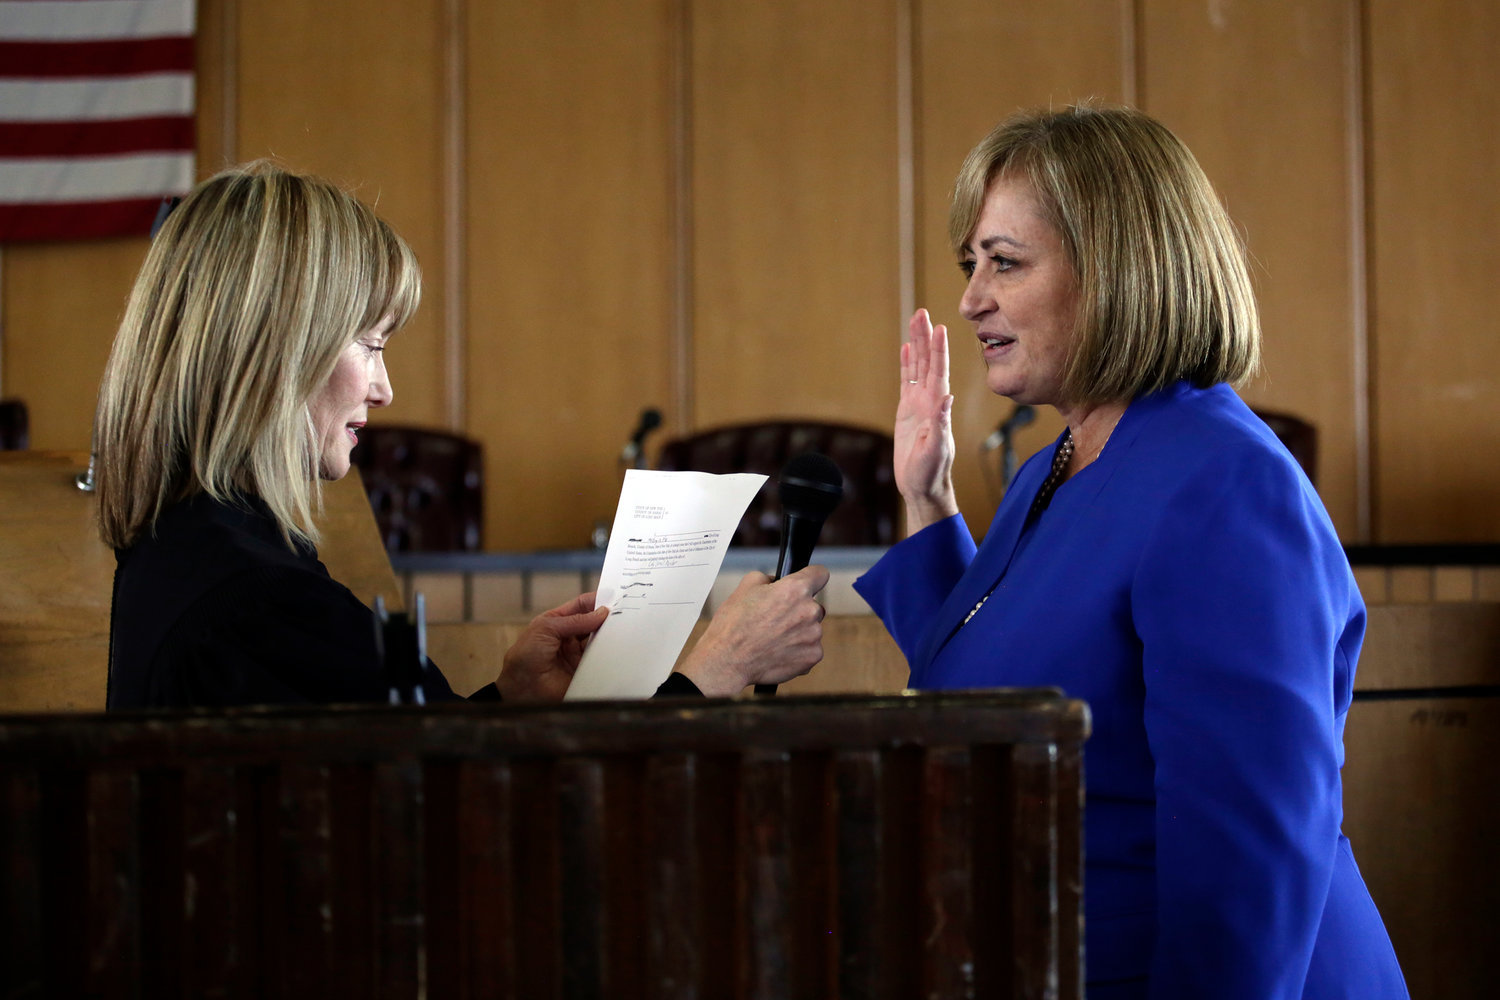 Karen McInnis is sworn in to serve on the Long Beach City Council, which is now dominated by women, 3-2.